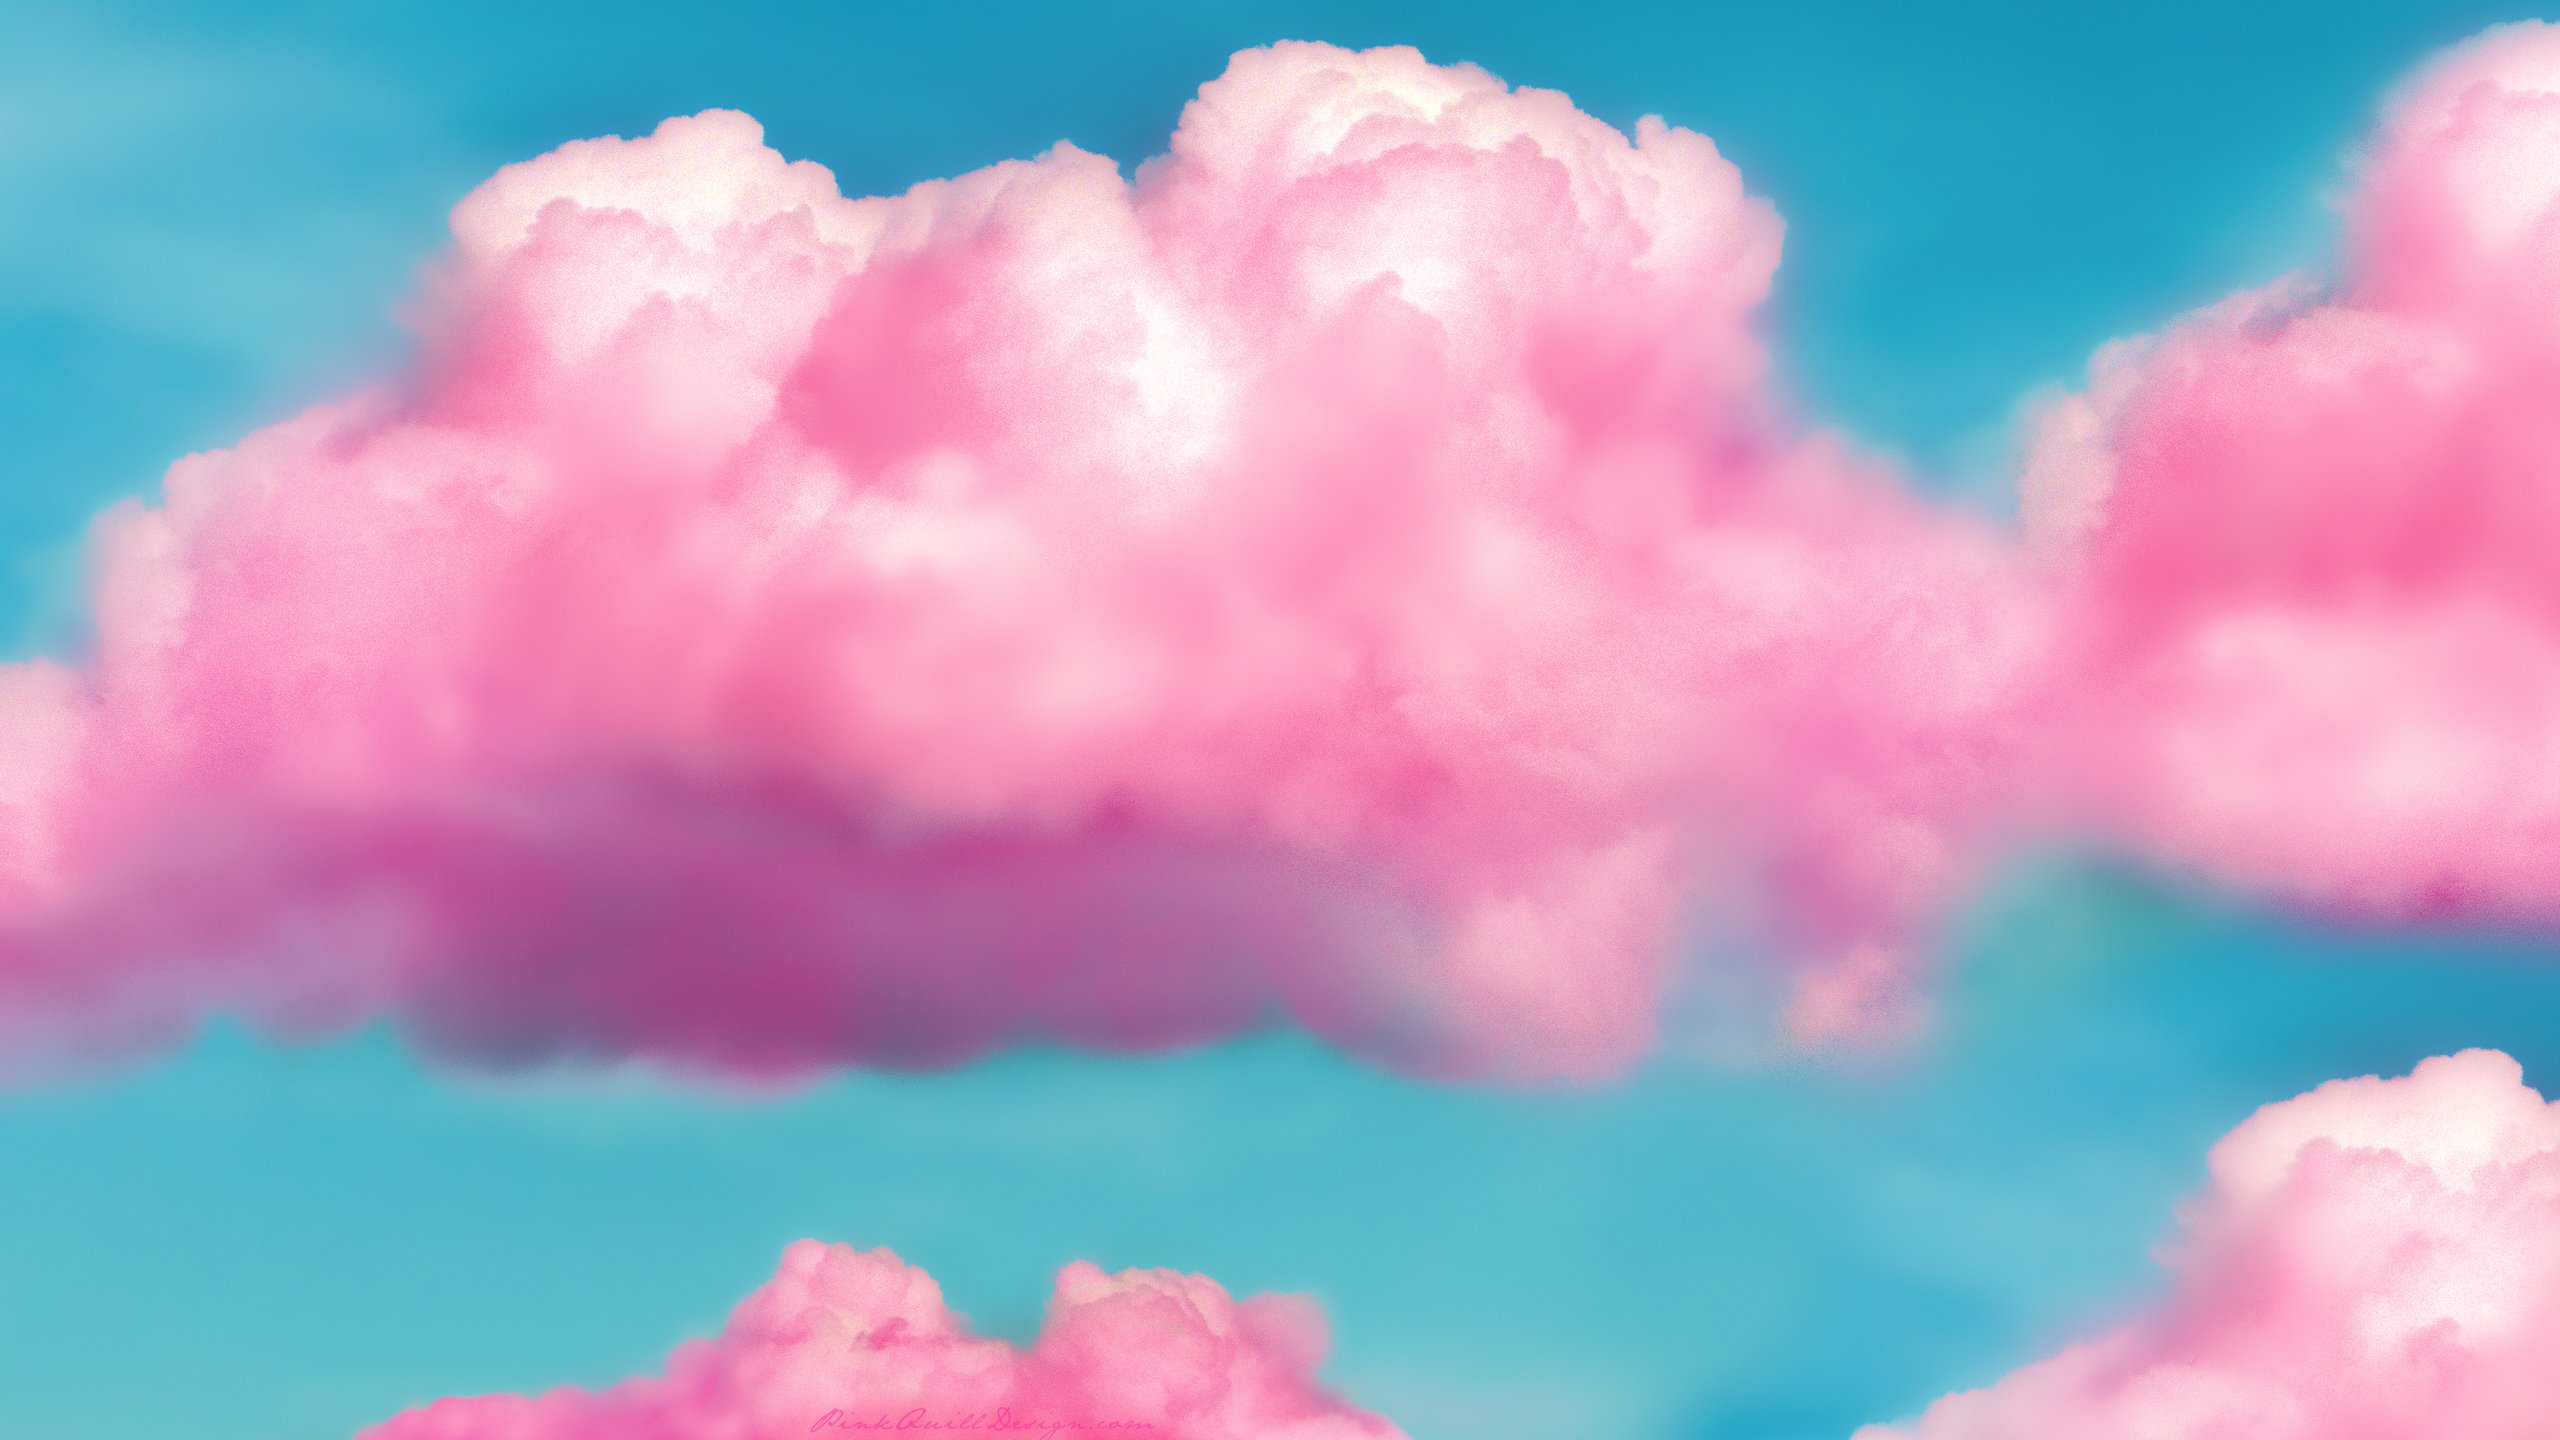 Pink Fluffy Clouds HD Wallpaper by pinkquilldesign on